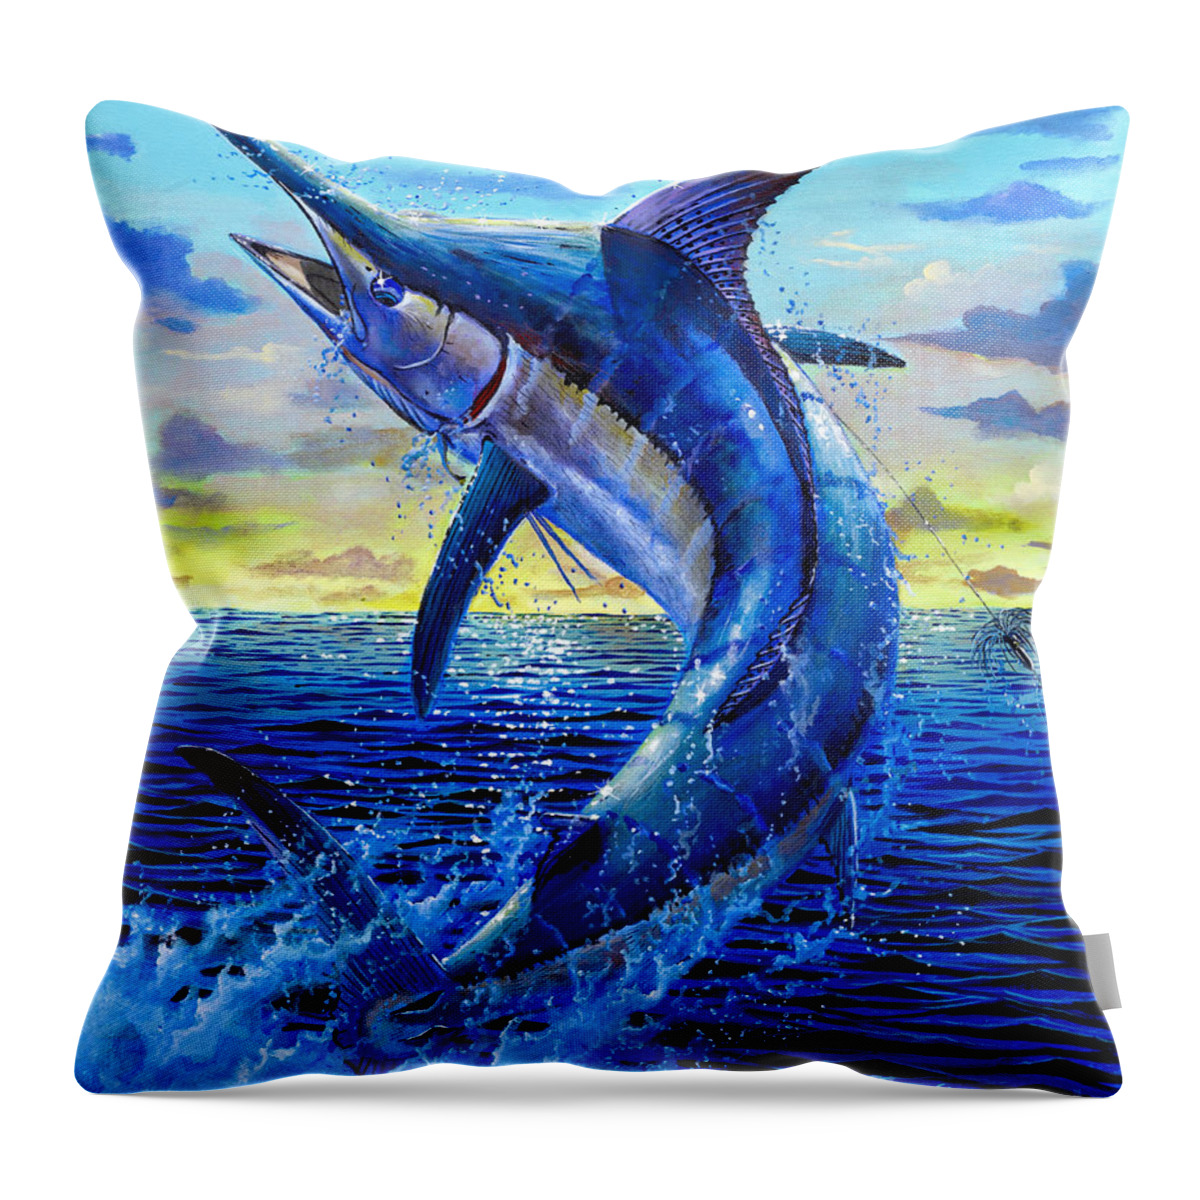 Marlin Throw Pillow featuring the painting Grander Off007 by Carey Chen